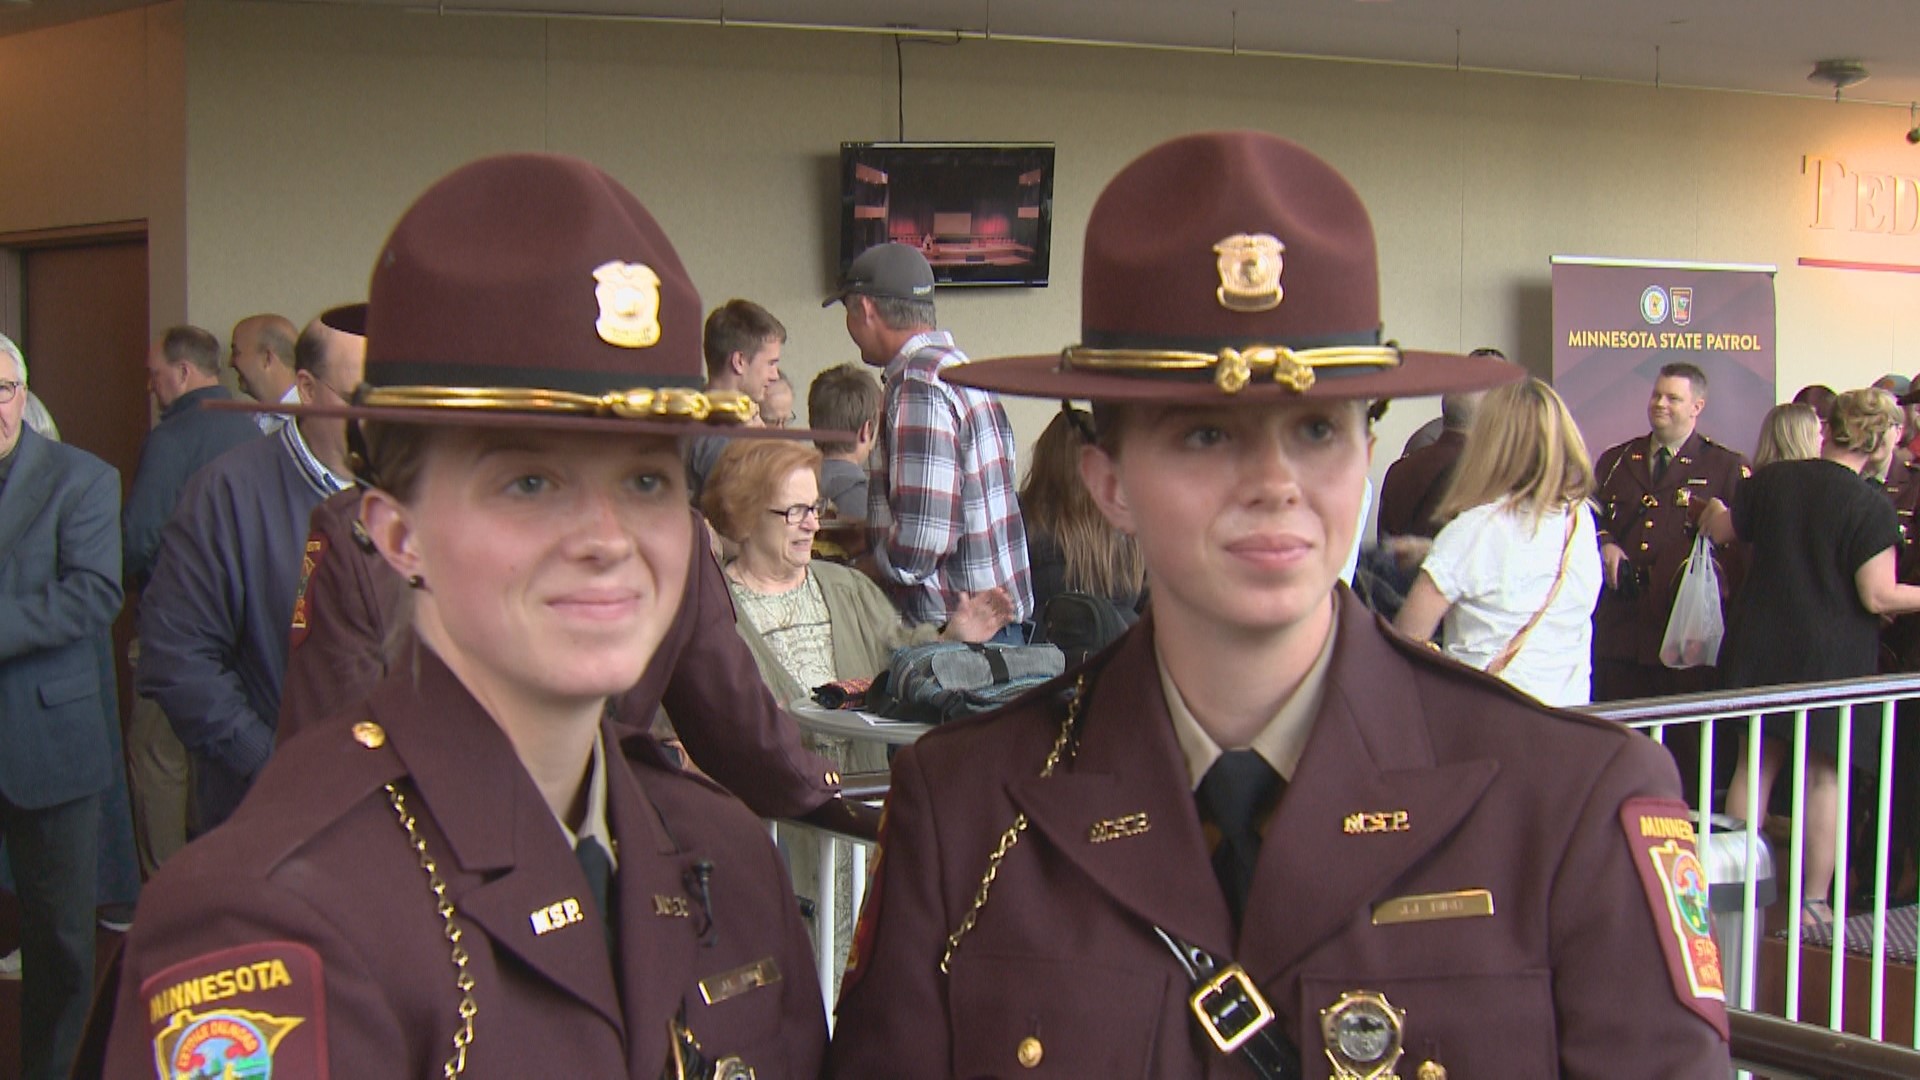 Jessica and Jamie Bird of Barnum, Minnesota were among 12 troopers who graduated into the Minnesota State Patrol this week.